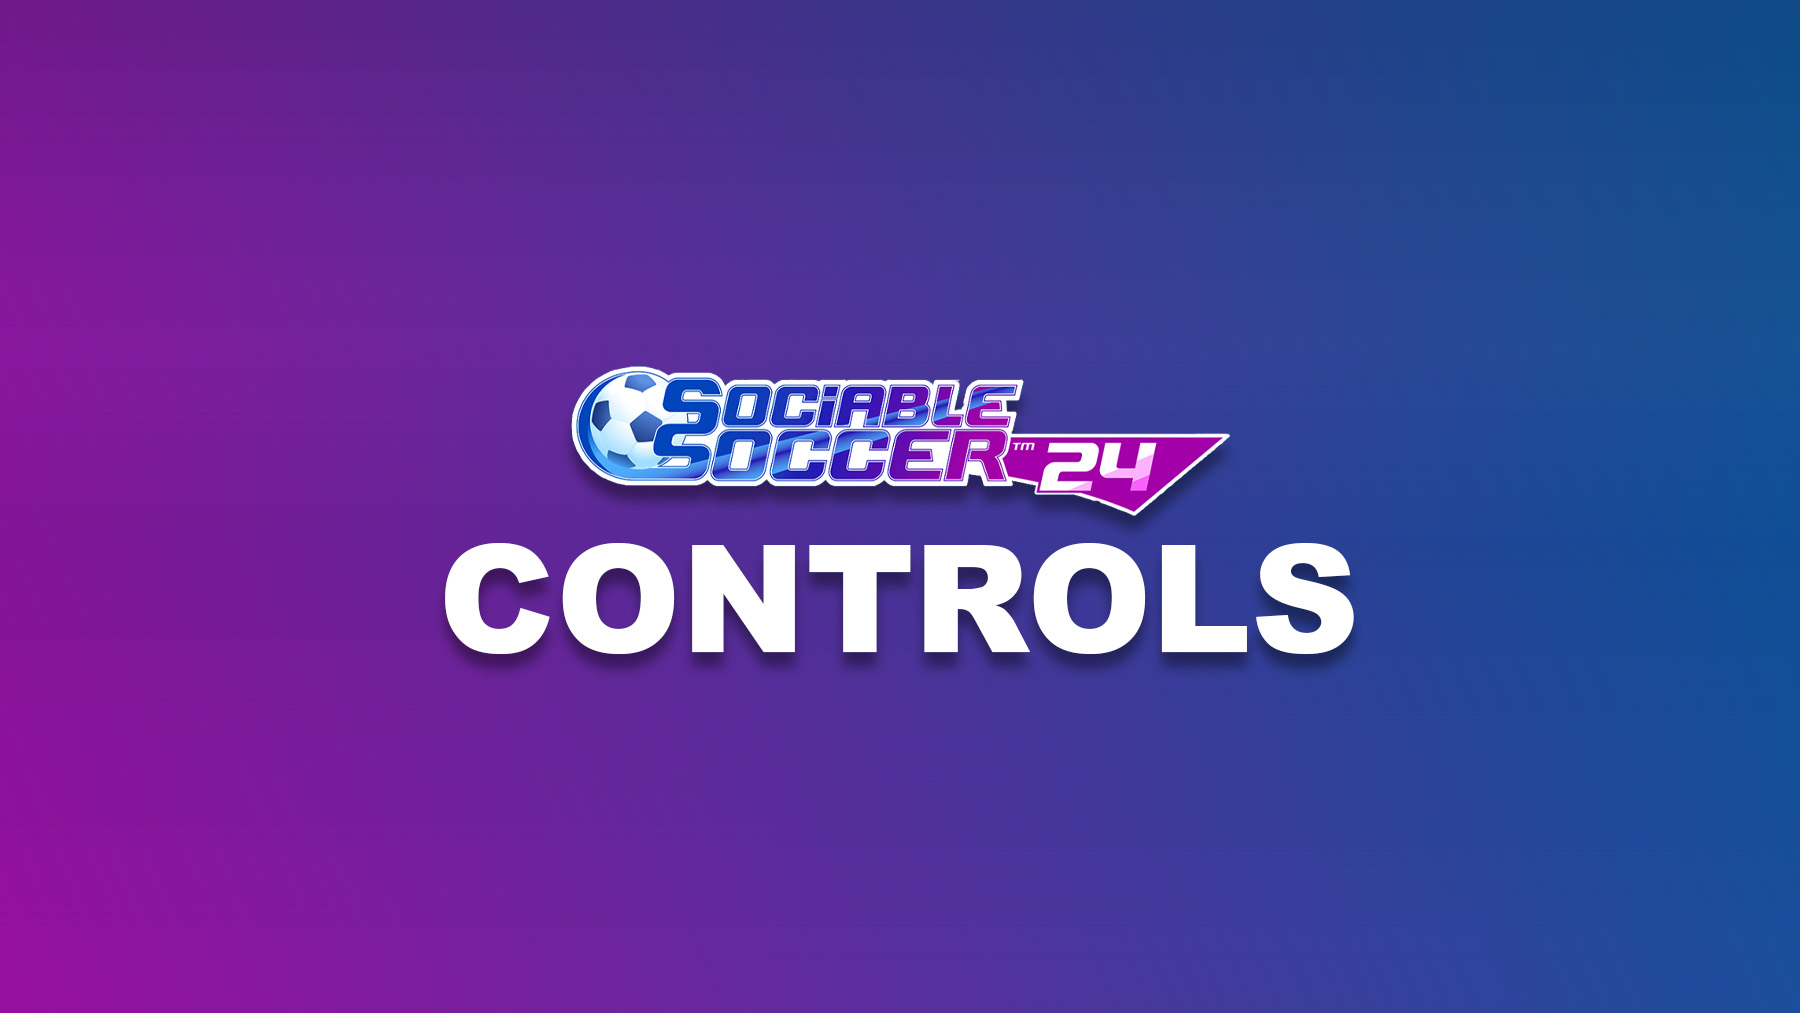 Controls and buttons guide for Sociable Soccer 24 video-game (PS, Xbox and PC).